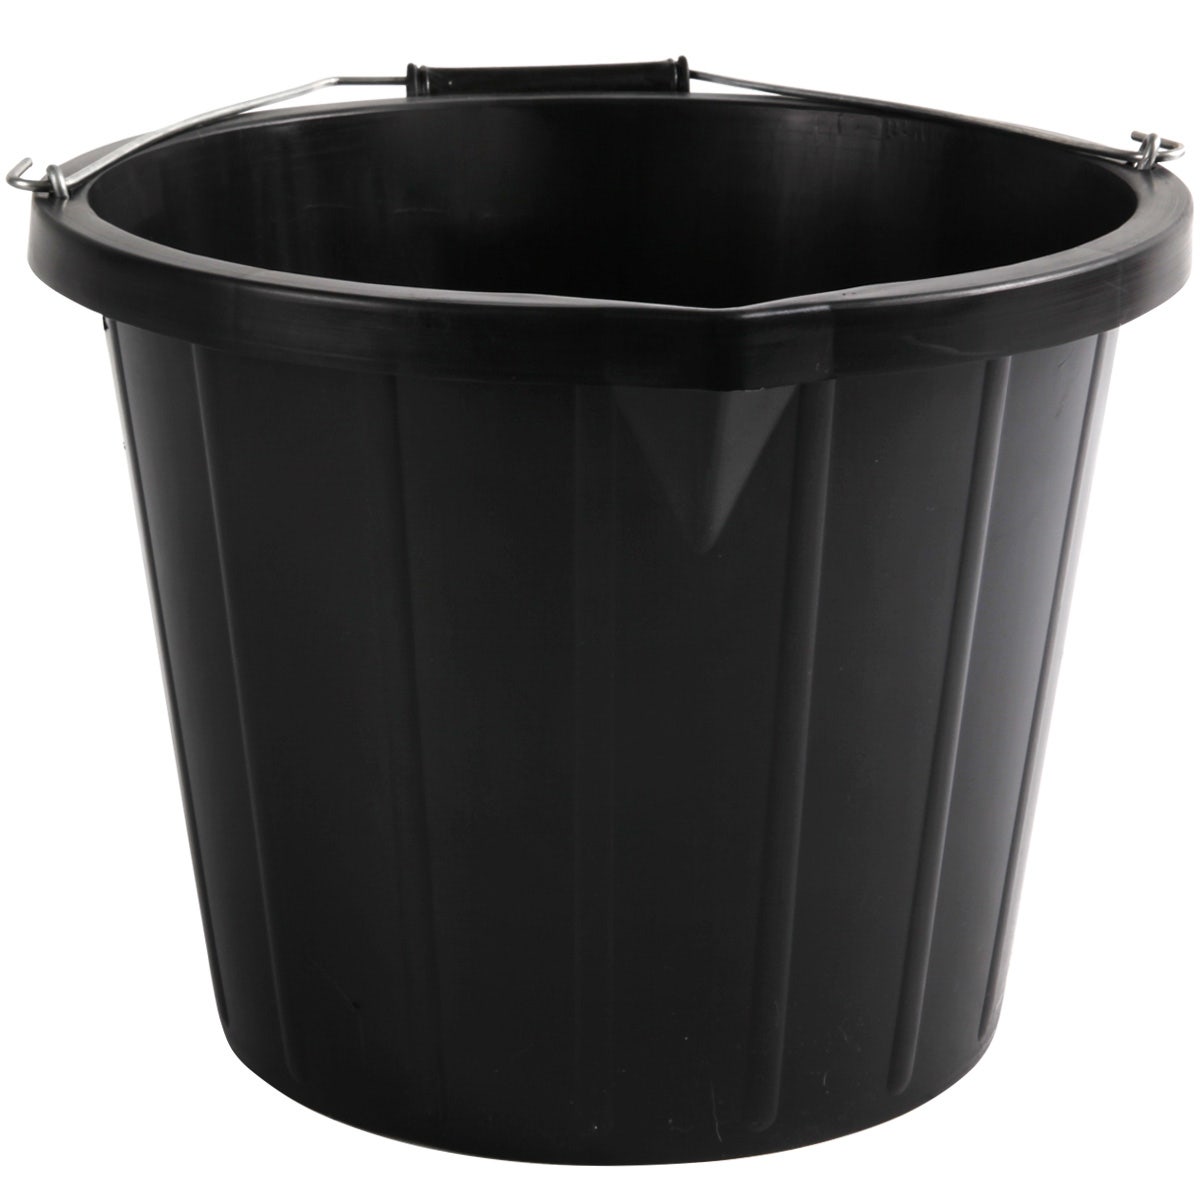 Bucket - Black 12.5 Litre with Internal Level Marks